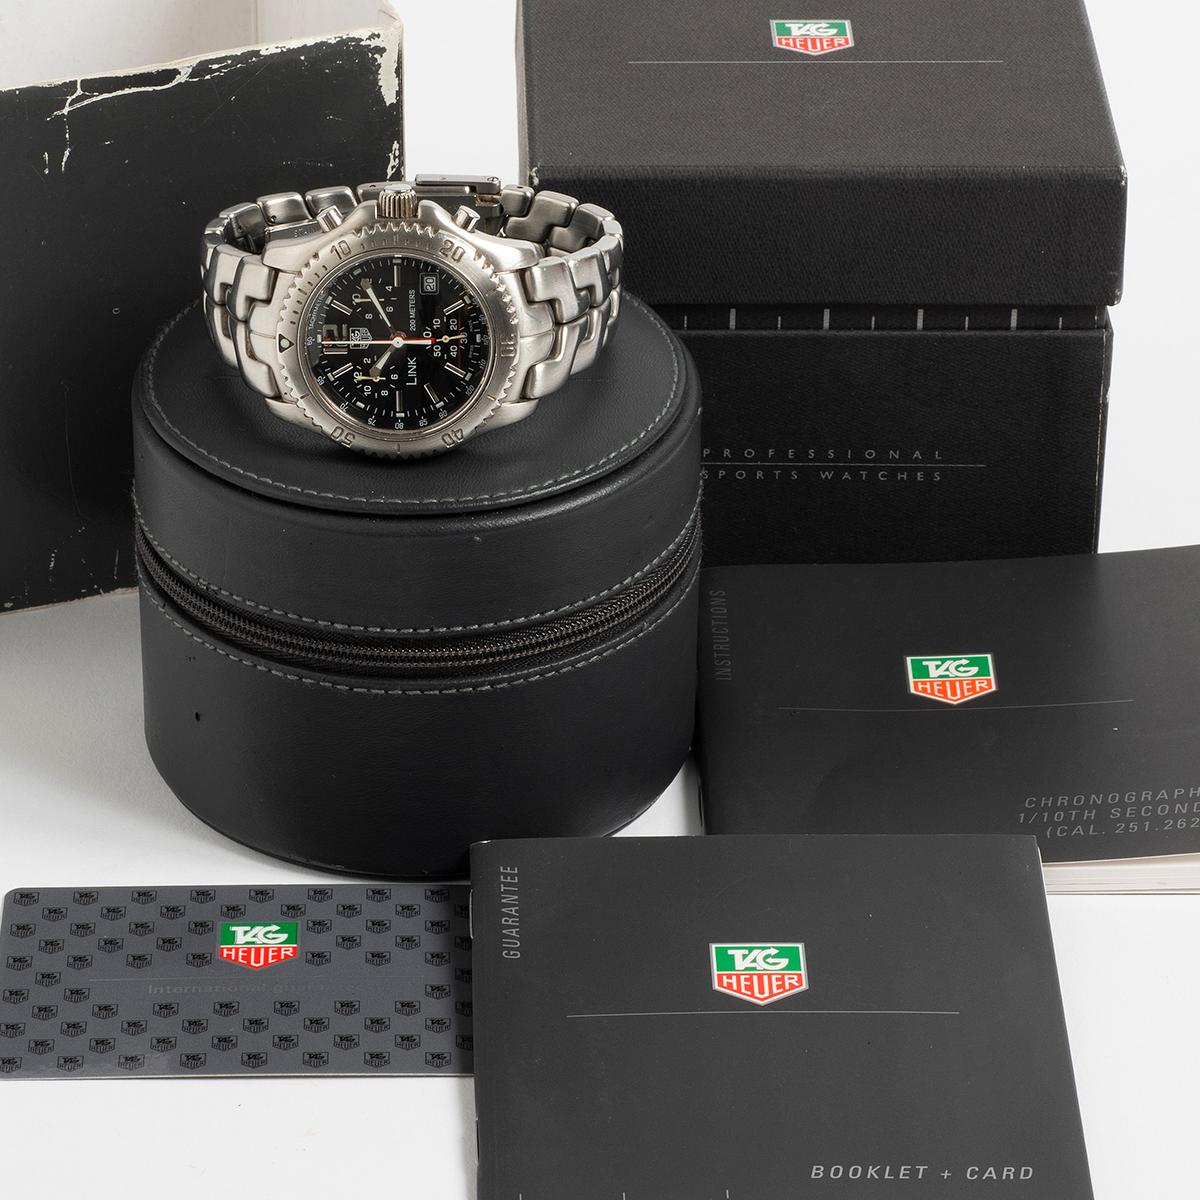 The Tag Heuer Link Chronograph CT1111-0 is known as the 